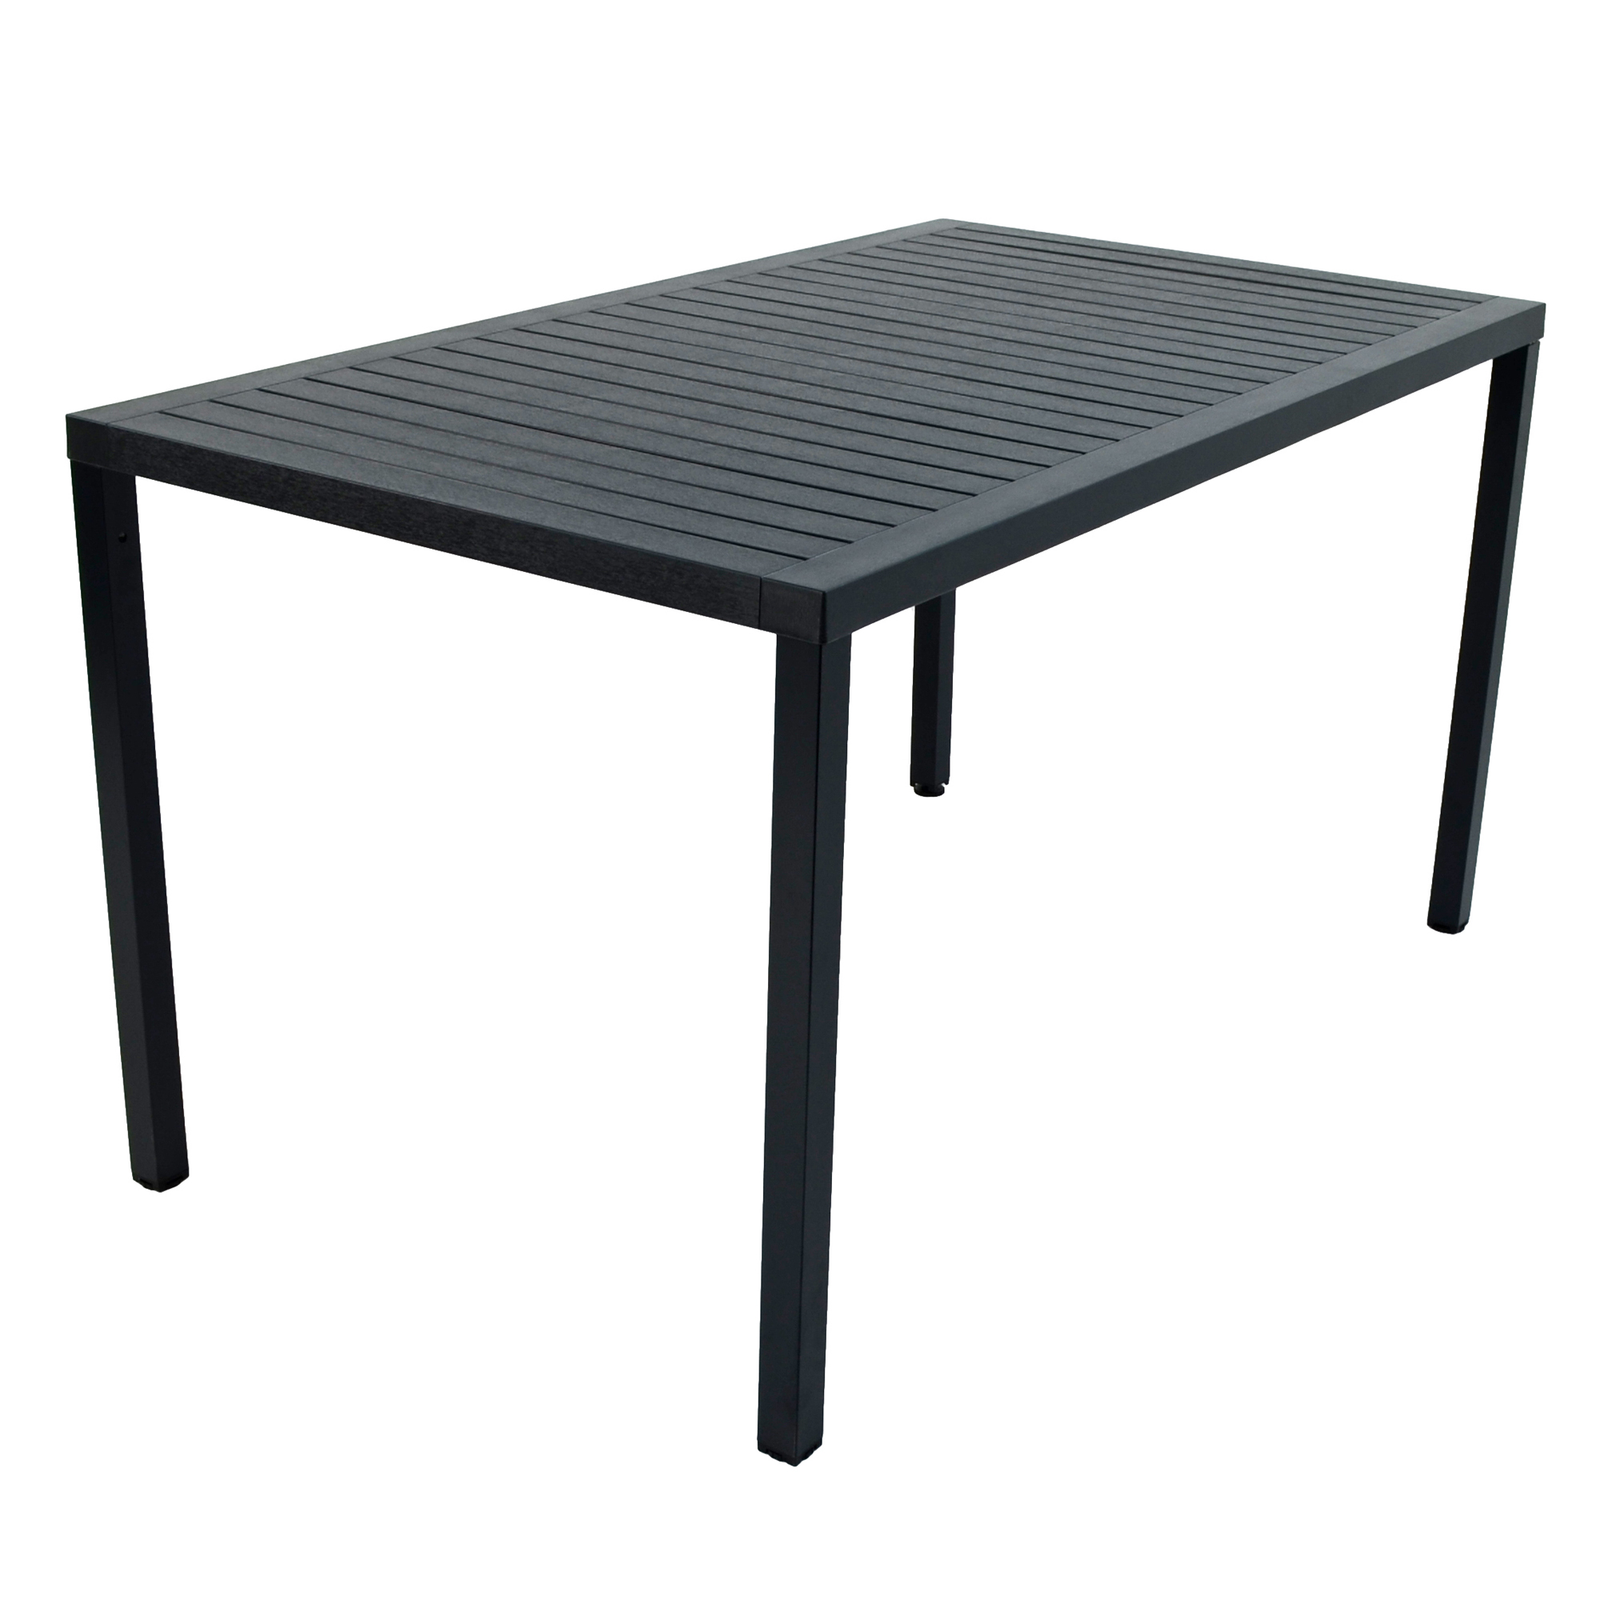 Nardi Cube Garden Table in Anthracite Grey Tables Nardi Default Title  